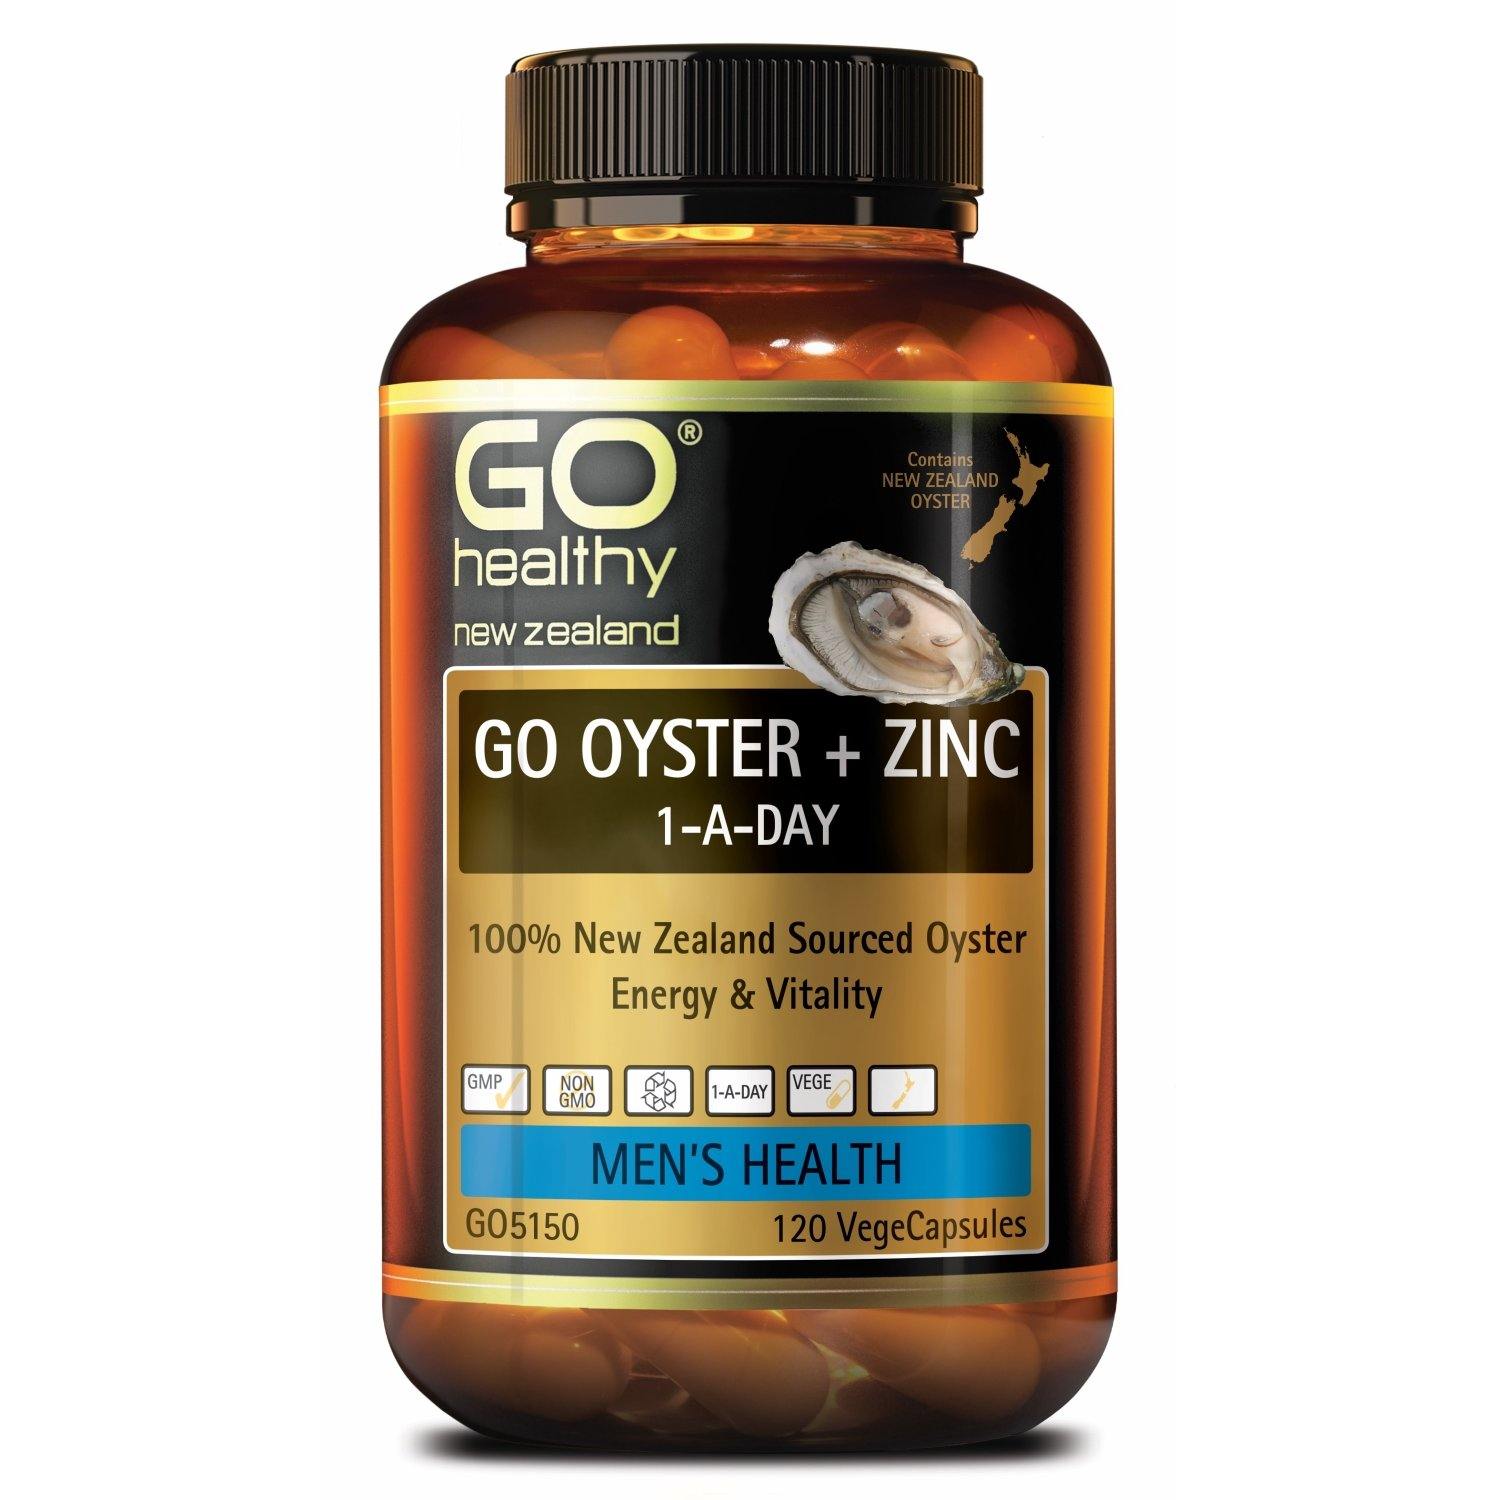 Buy 3 Get 1 Free - Go Healthy Oyster + Zinc 120 capsules - Ingredient: Oyster, Ingredient: Zinc, nz made, Price  $50-$150, Specials, Vendor  Go Healthy - Aotea Wellness